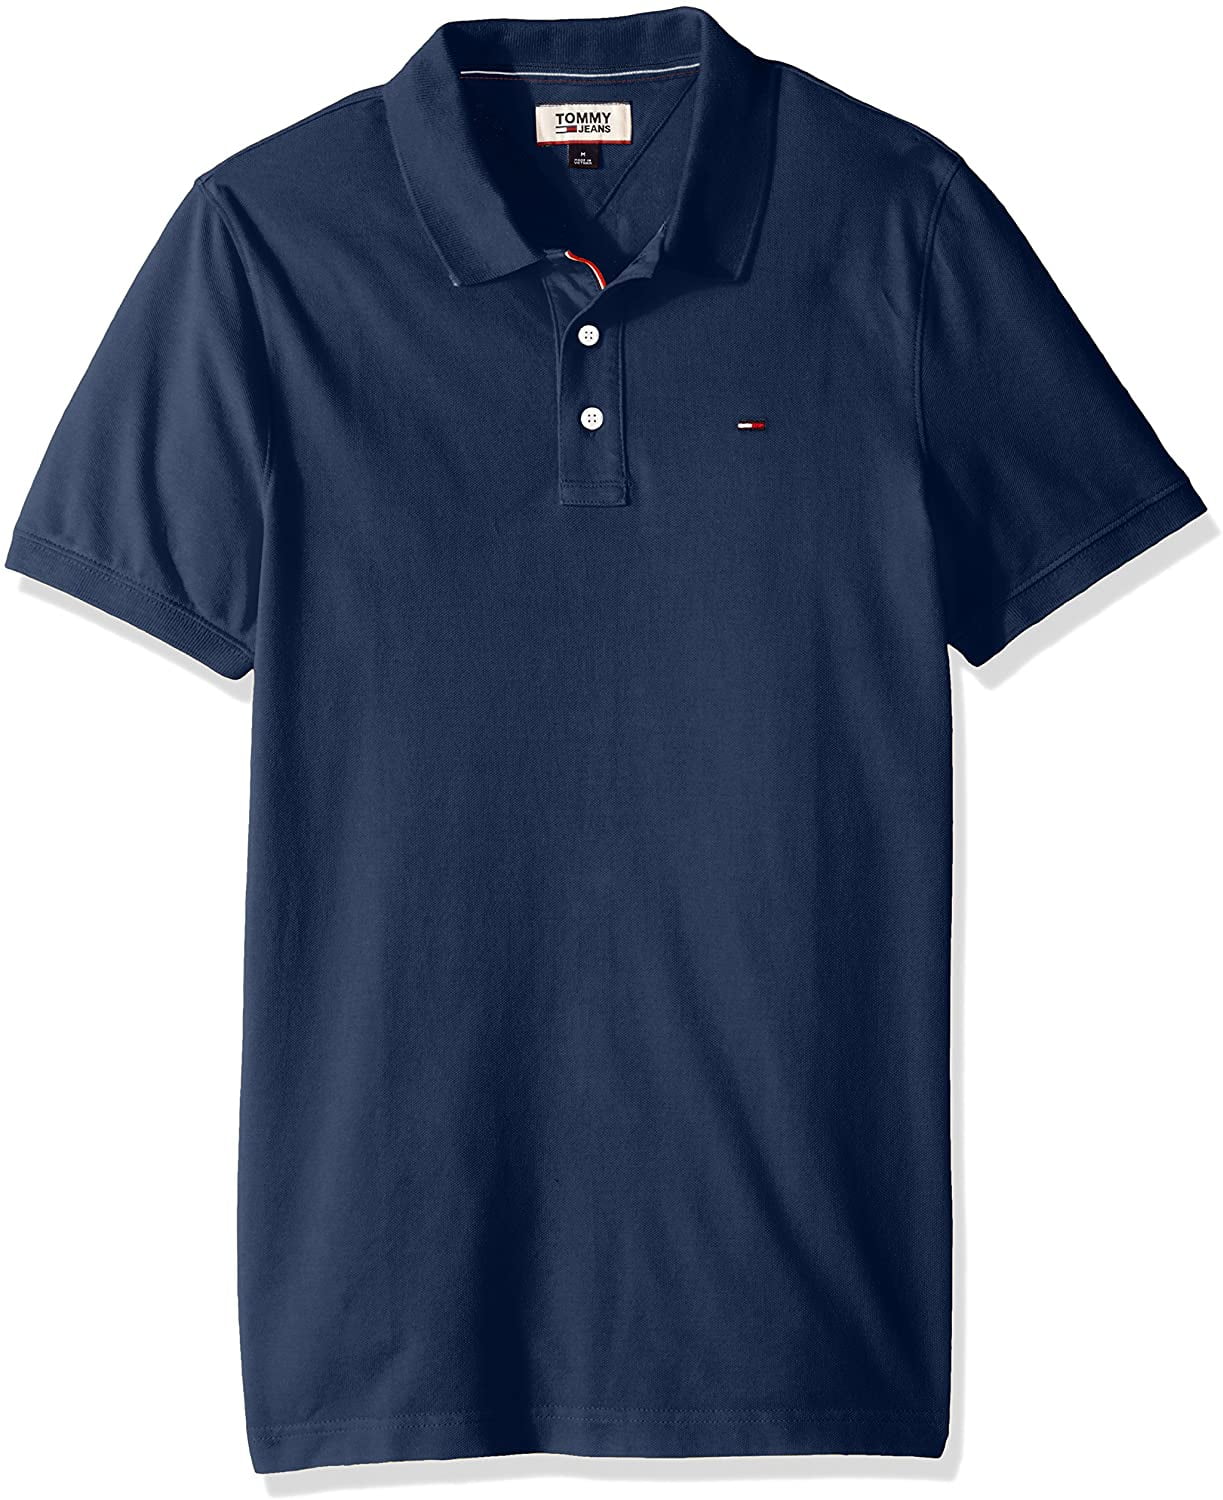 tommy jeans polo